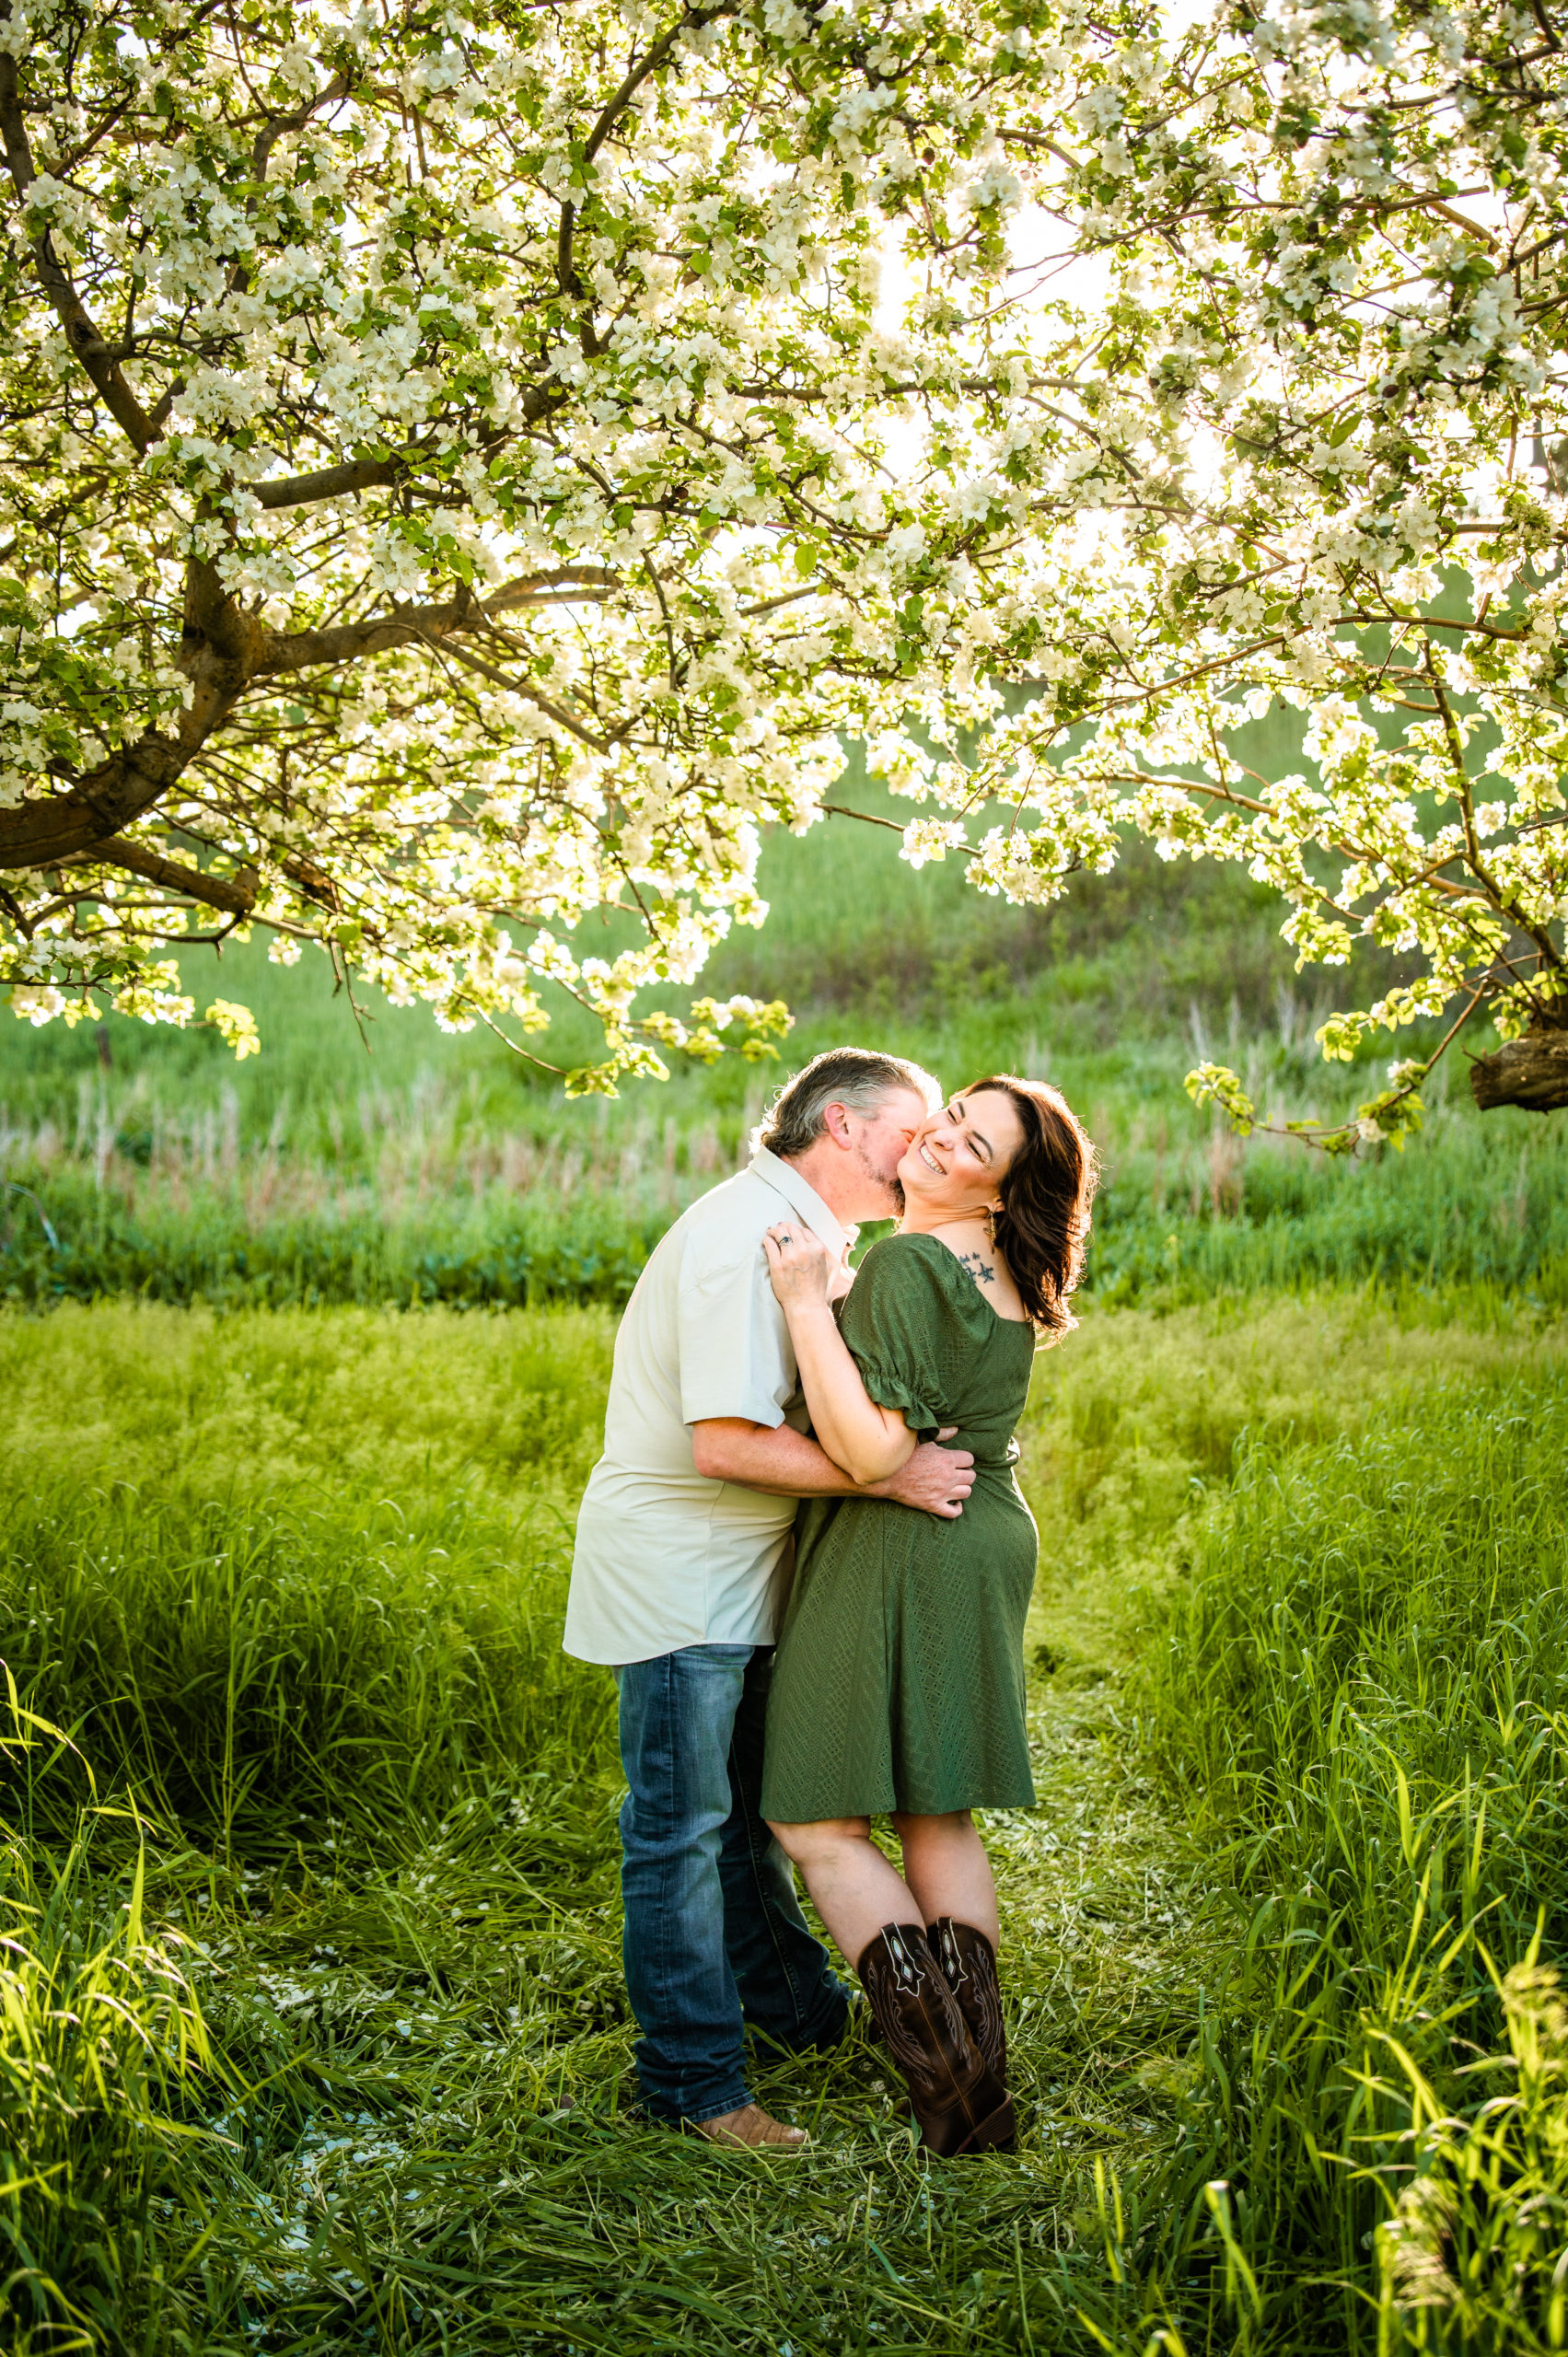 man and woman embracing in field of grass during engagements